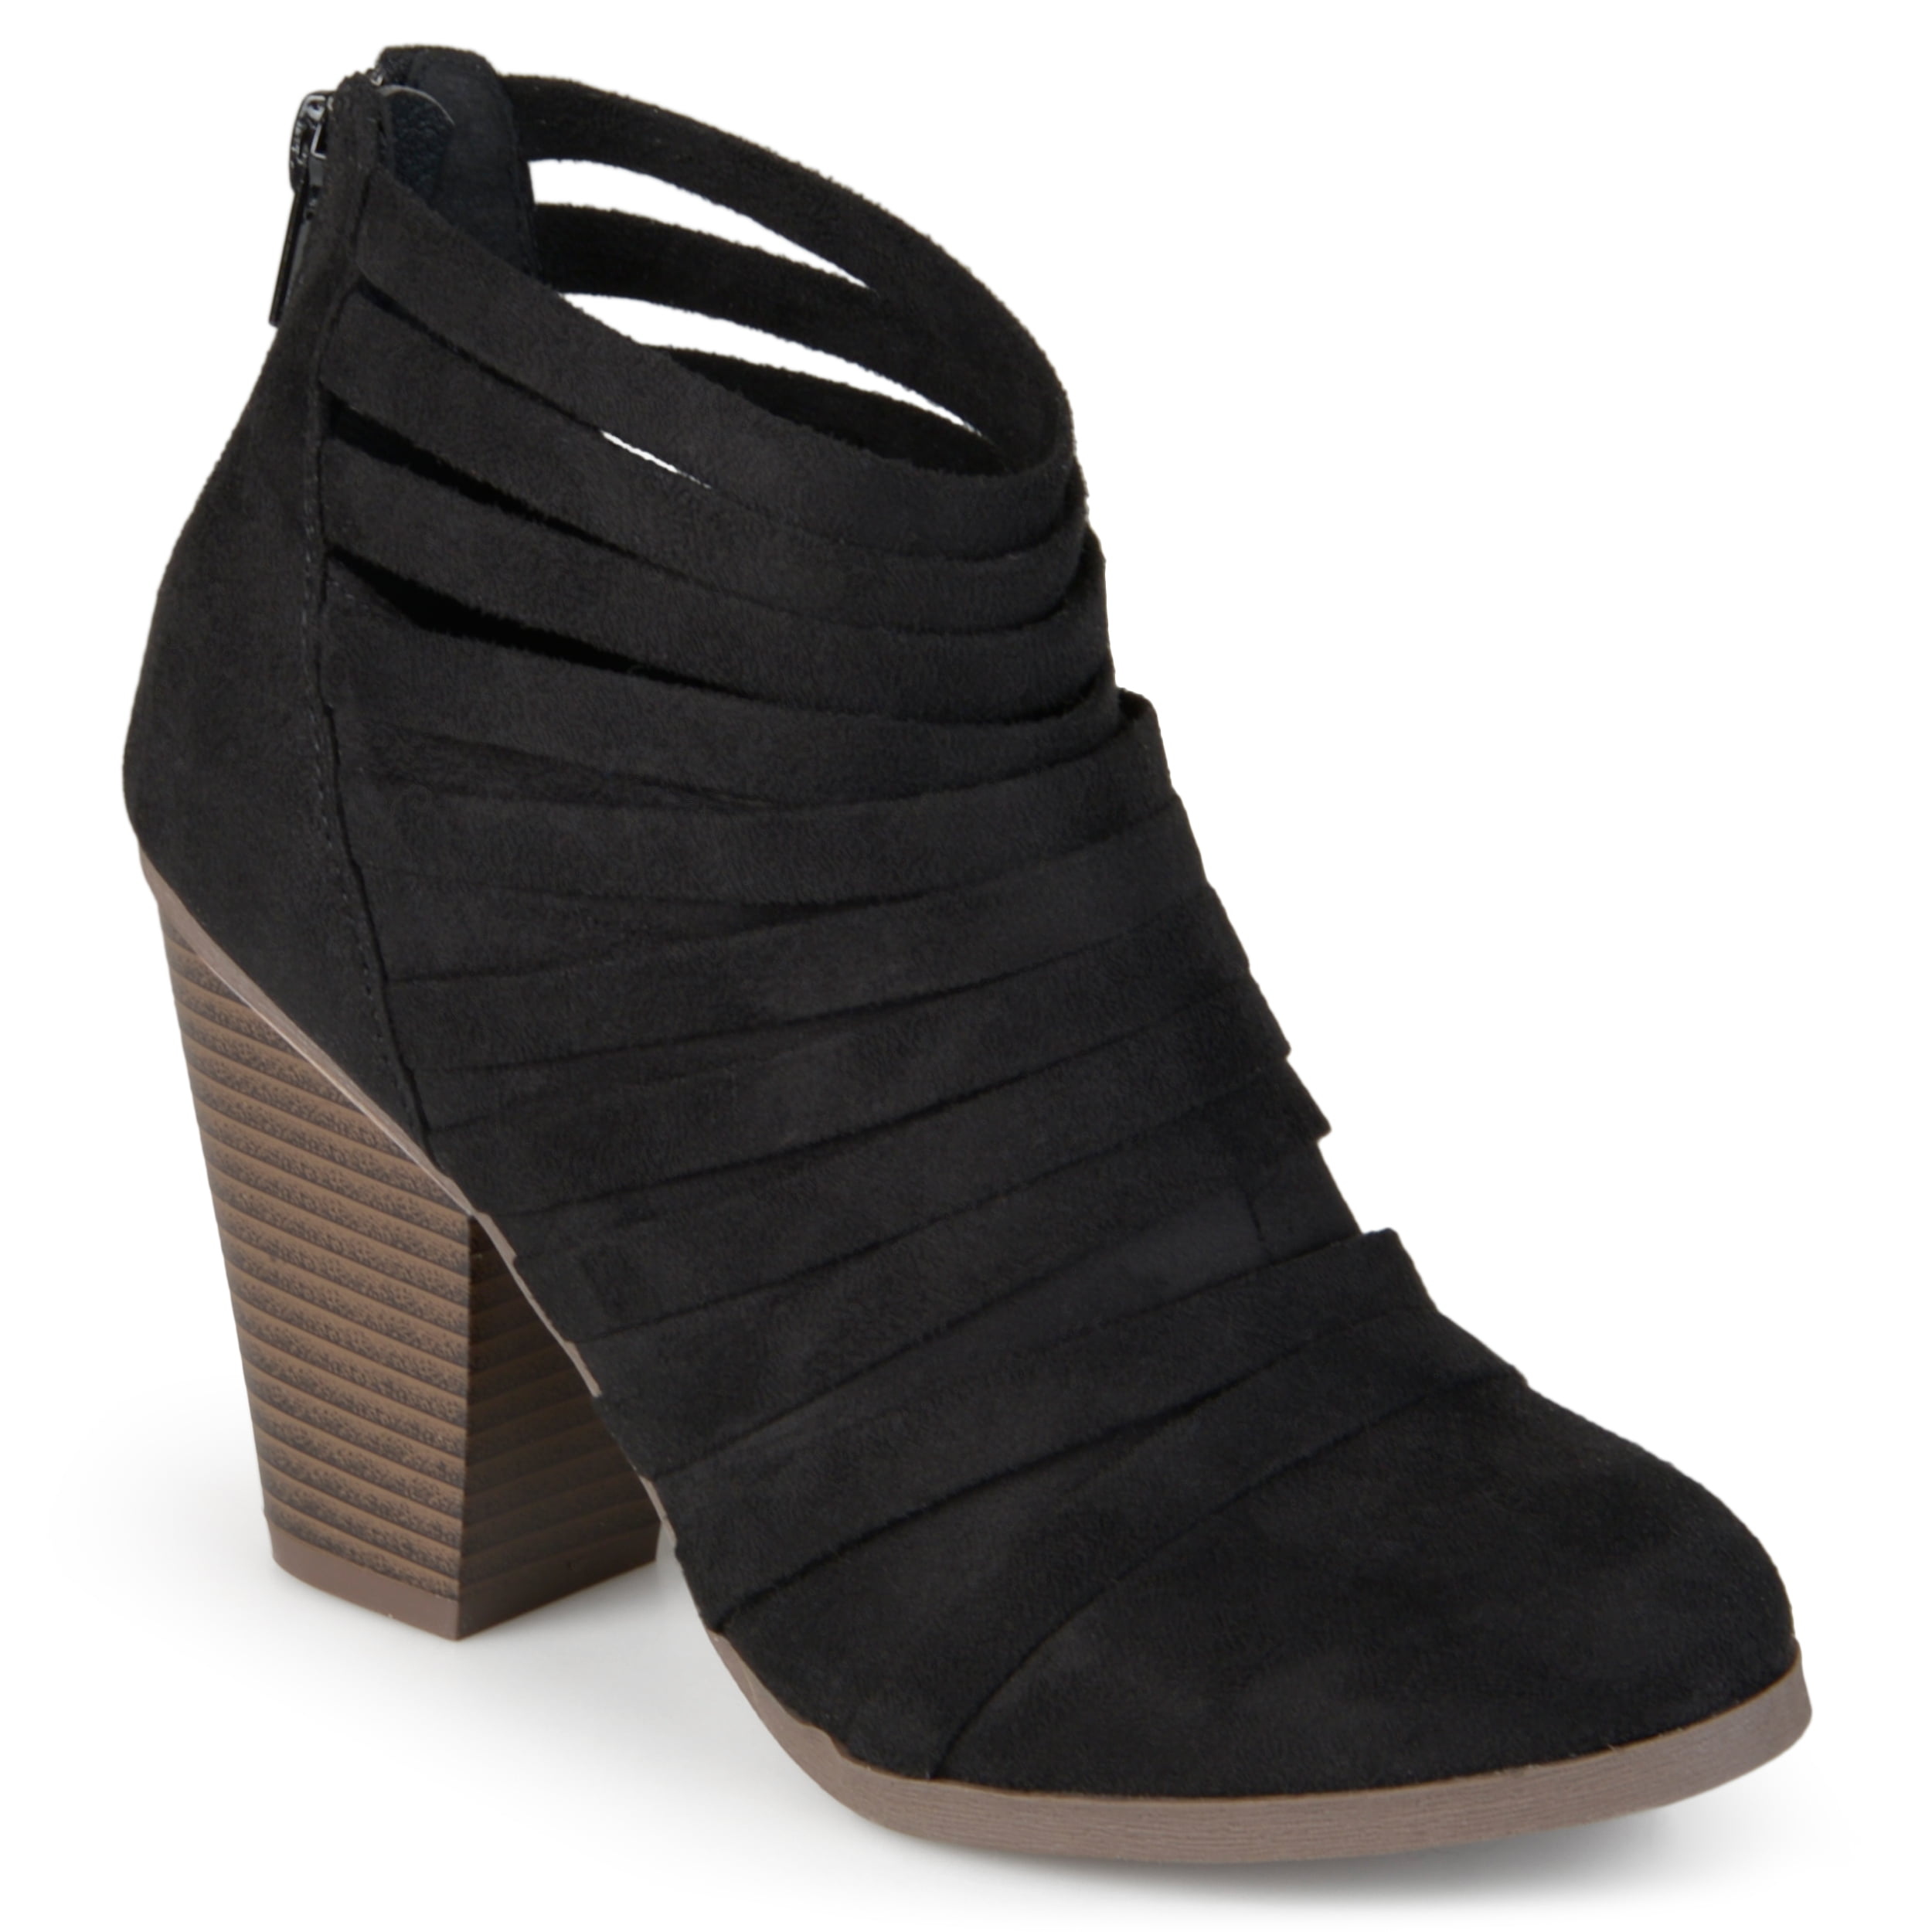 Brinley Co. - Women's Chunky Heel Strappy Faux Suede Ankle Booties ...